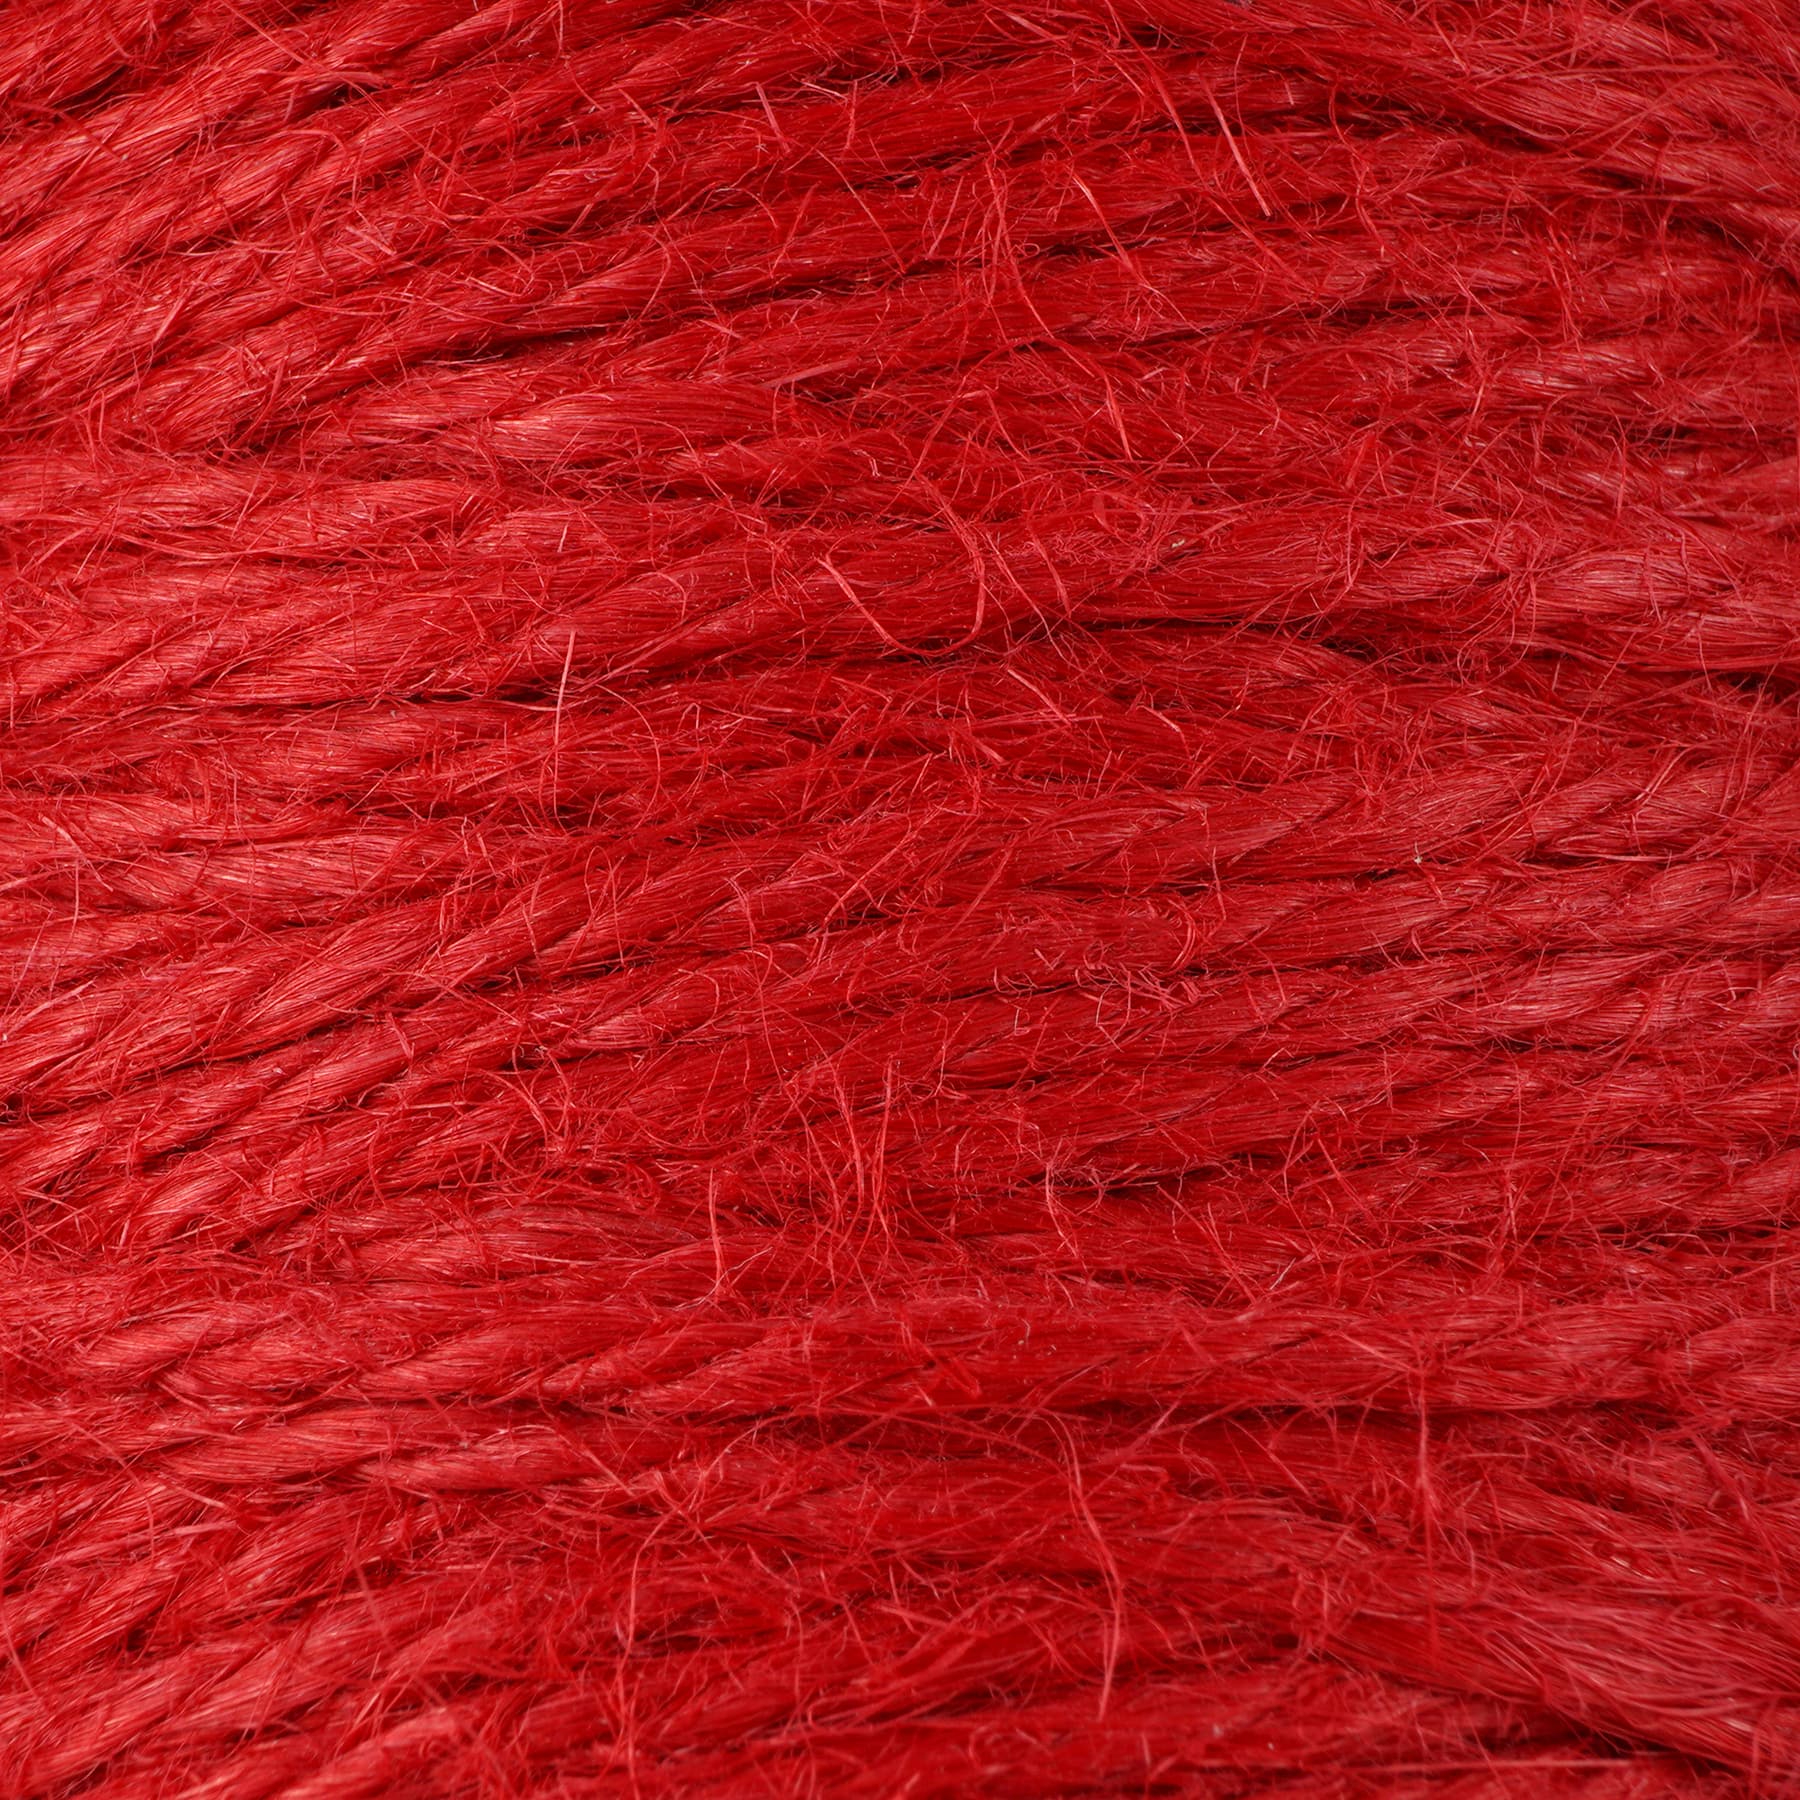 37yd. Red & White Twine by Recollections™ Christmas